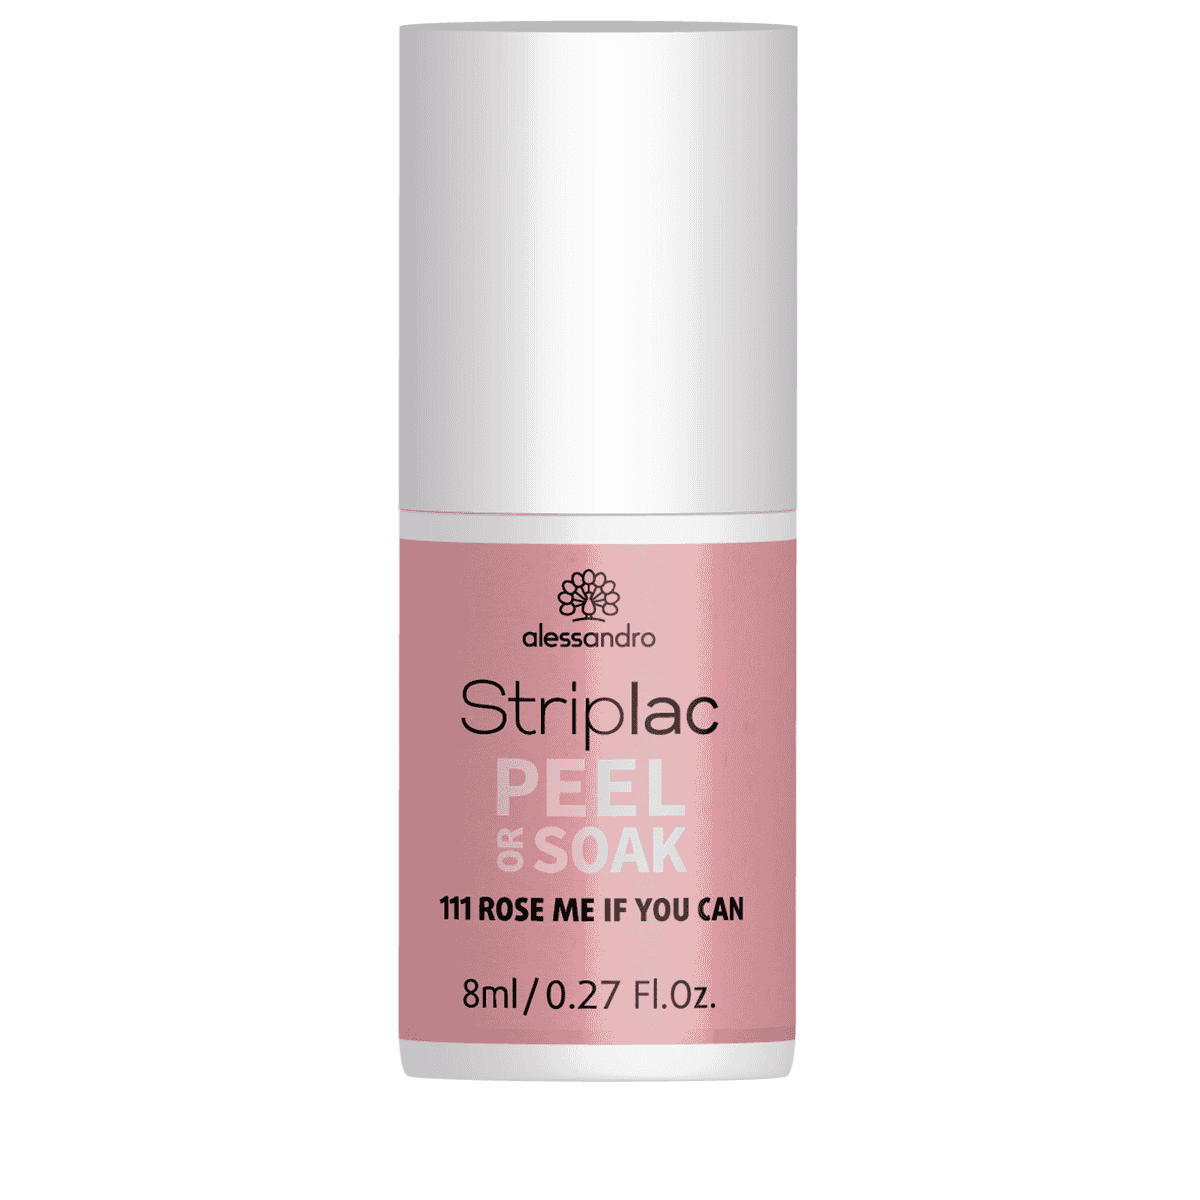 Alessandro - Striplac Peel or Soak - Rose me if you can - 8ml